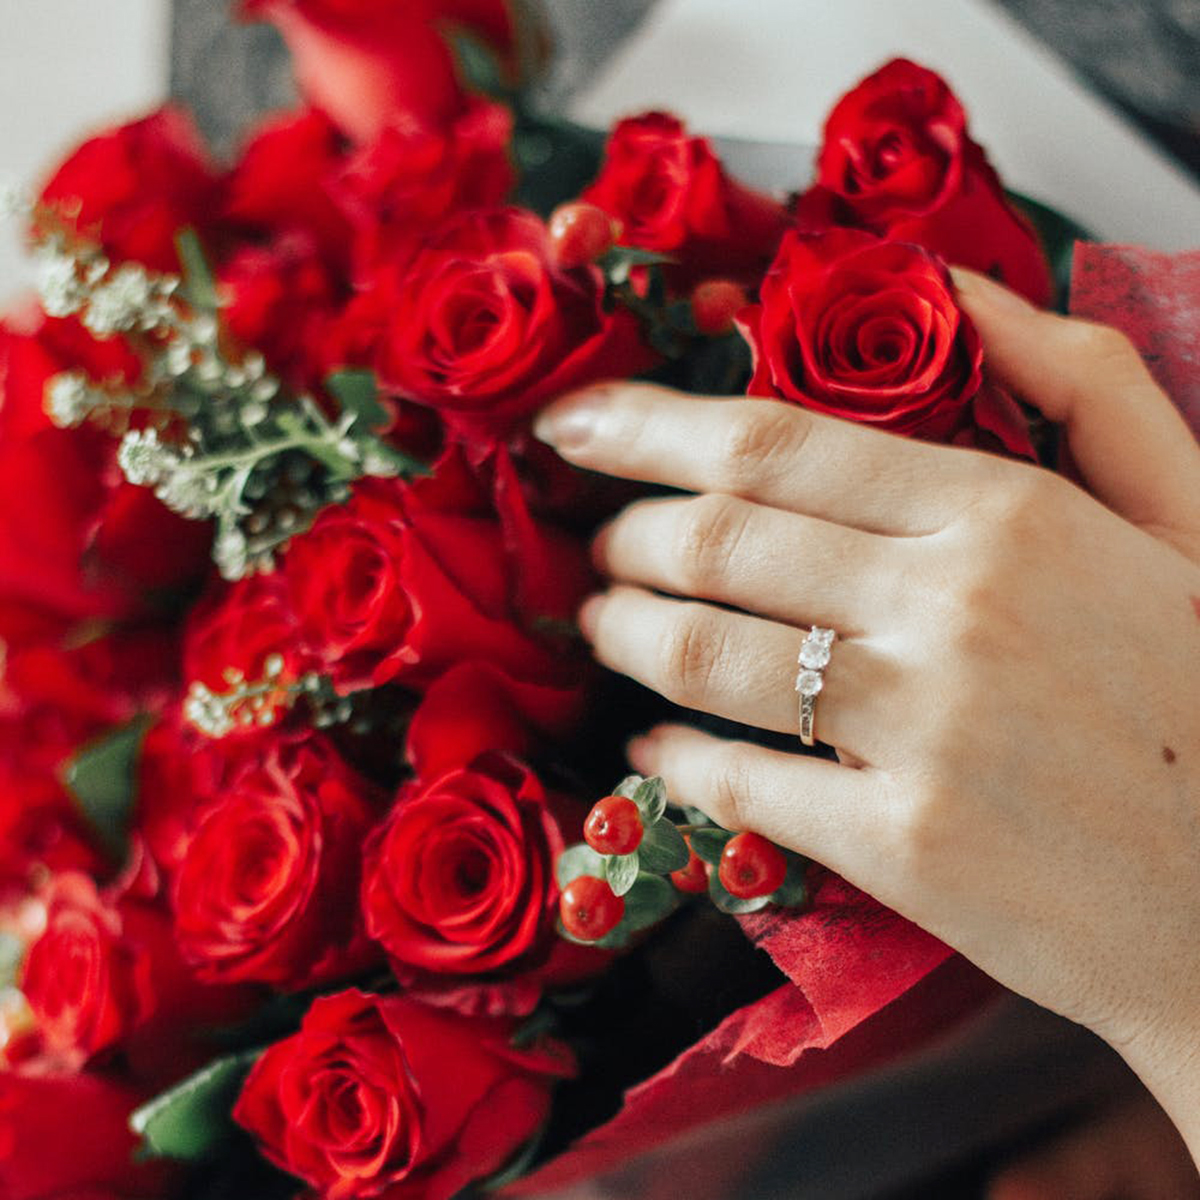 Woman holding a bouquet of red roses.